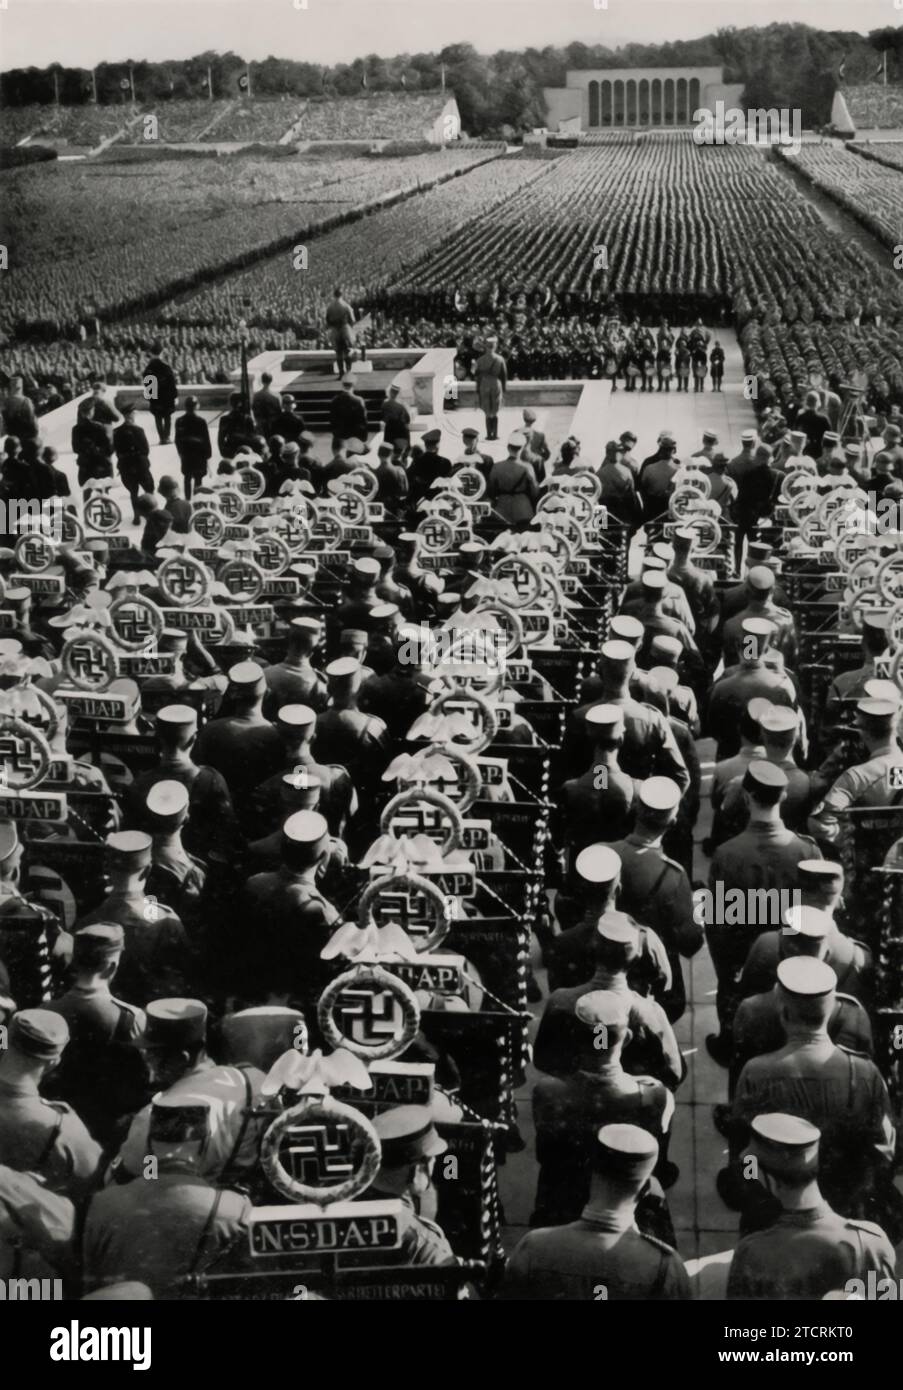 1935 Reichsparteitag (Nazi Party Rally) during the 'Standartenweihe und Totenehrung' (Consecration of the Standards and Commemoration of the Dead), Adolf Hitler is seen making a speech in front of thousands of troops and supporters. This event, combining the solemn remembrance of fallen party members with the ceremonial consecration of military standards, highlights the regime's use of ritual and spectacle. Hitler's address, set against the backdrop of a massive assembly, underscores the orchestrated nature of these rallies in promoting Nazi ideology and reinforcing the Führer's central role. Stock Photo